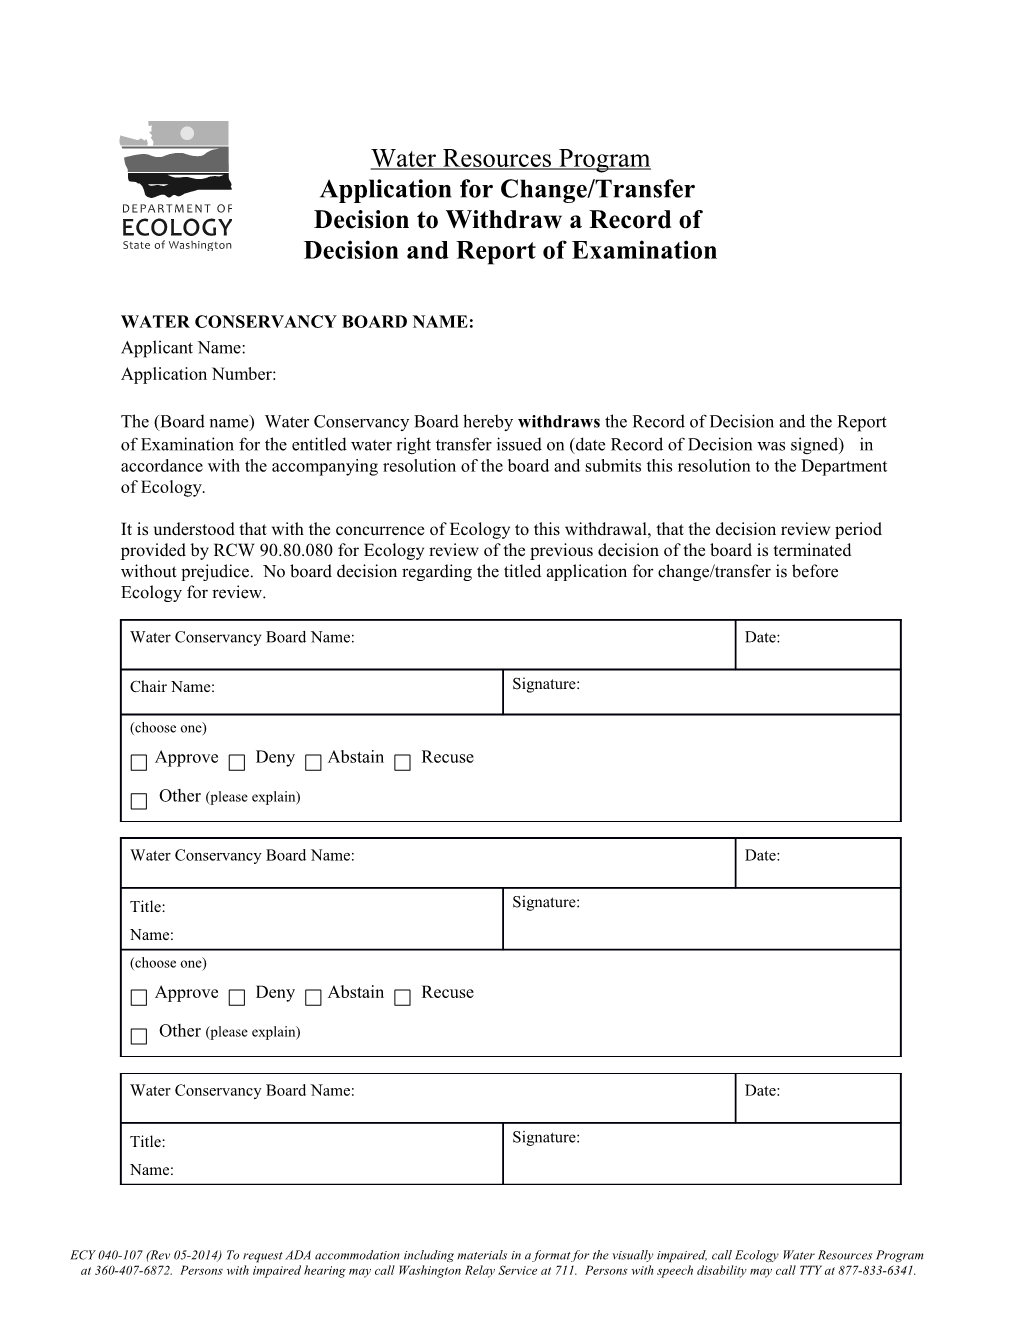 Application for Change/Transfer Decision to Withdraw a Record of Decision and Report of Exam